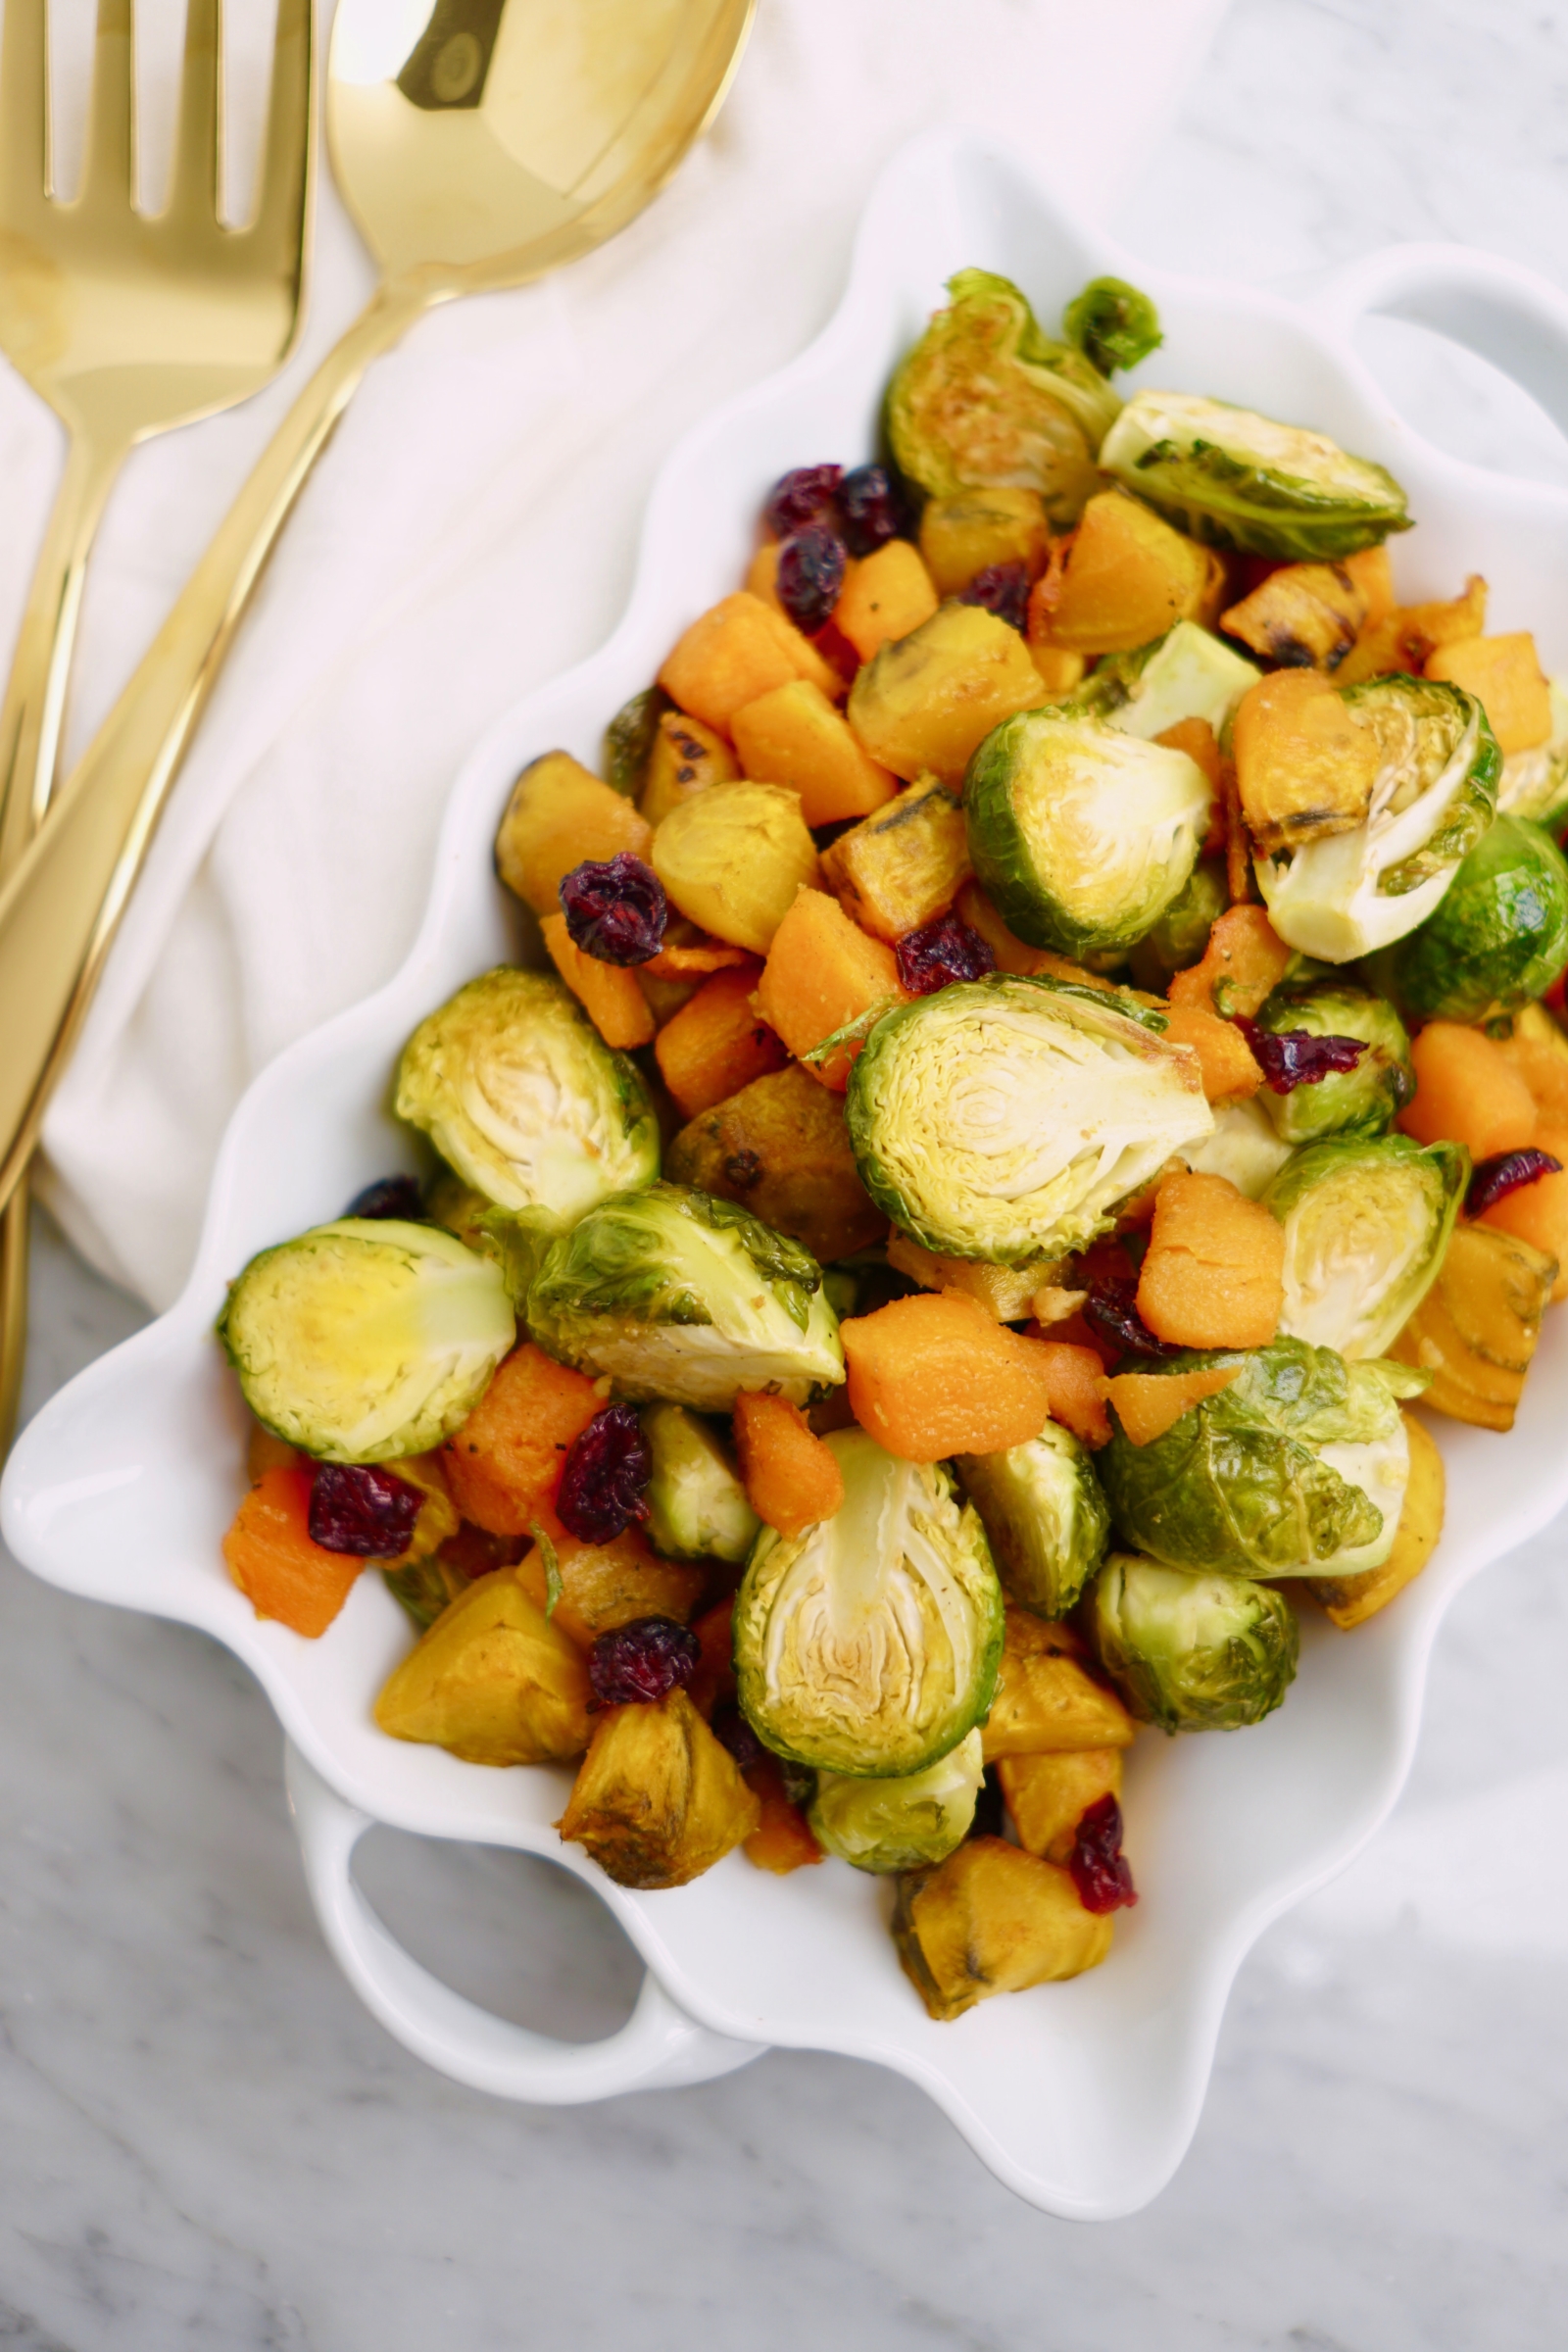 roasted thanksgiving vegetables - brussels sprouts, butternut squash, beets